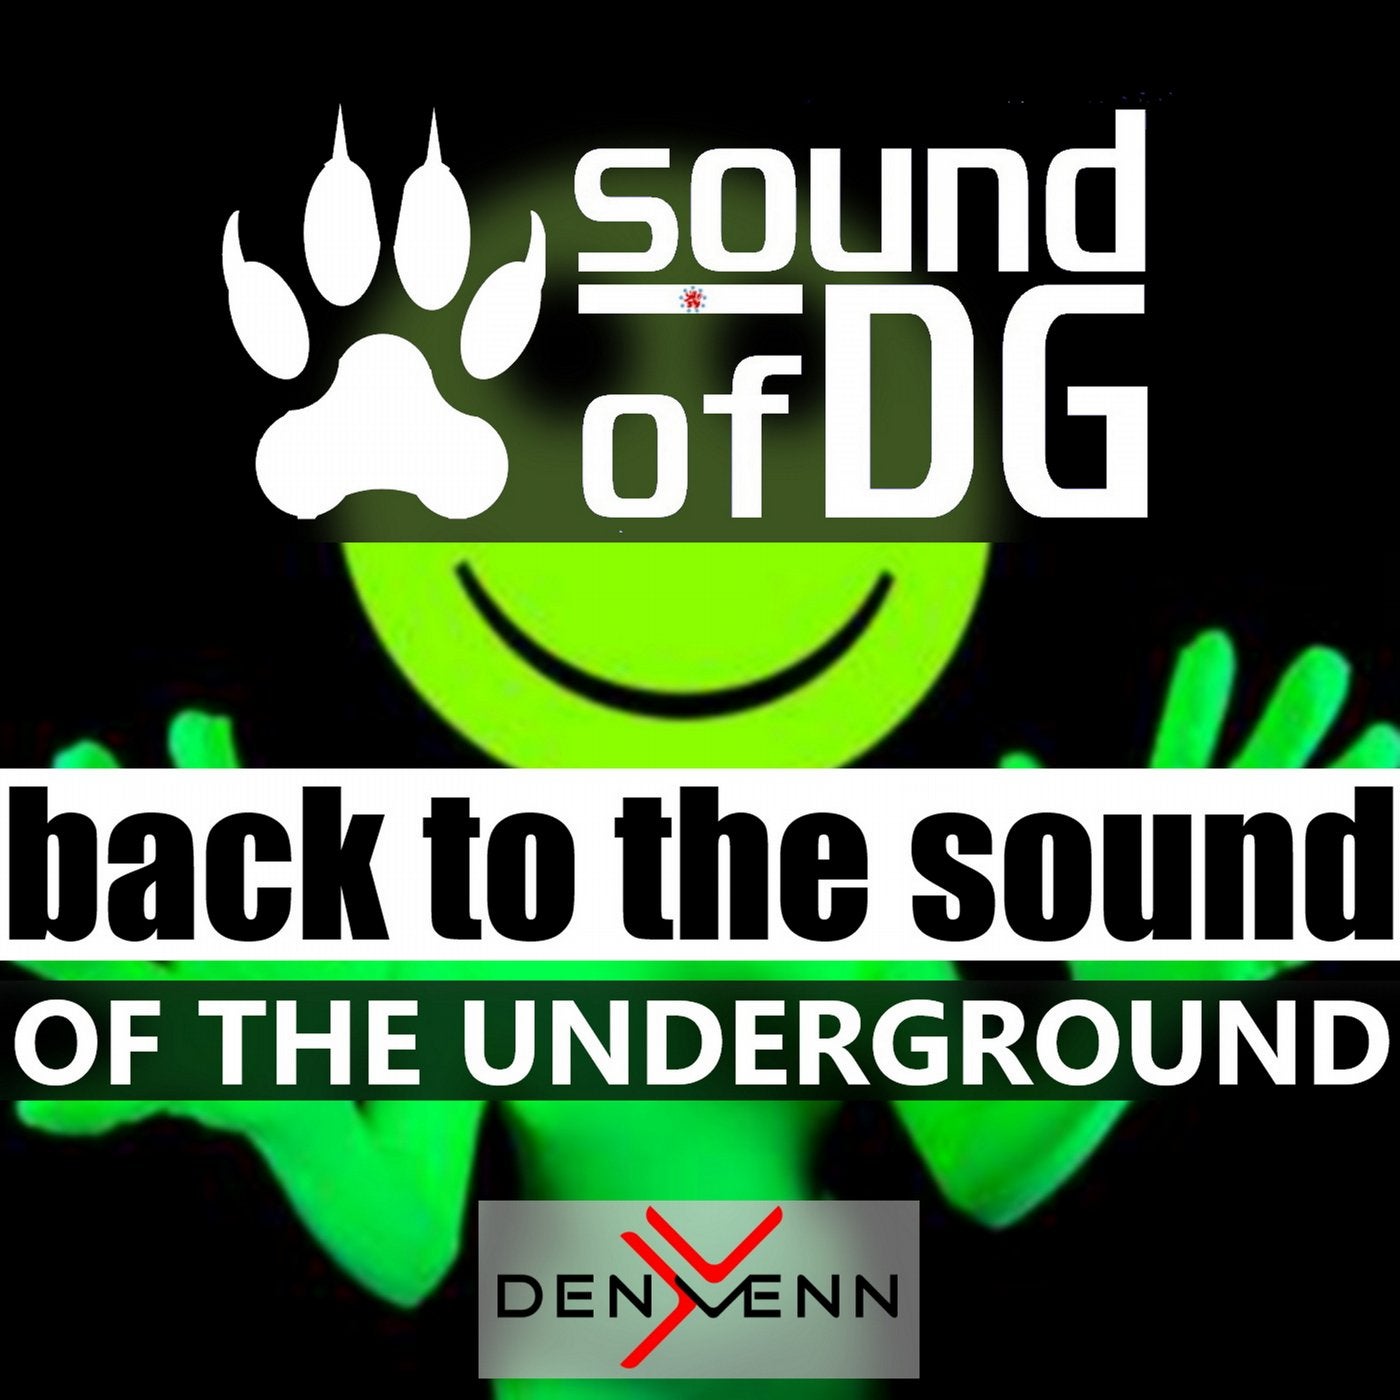 Back to the Sound of the Underground